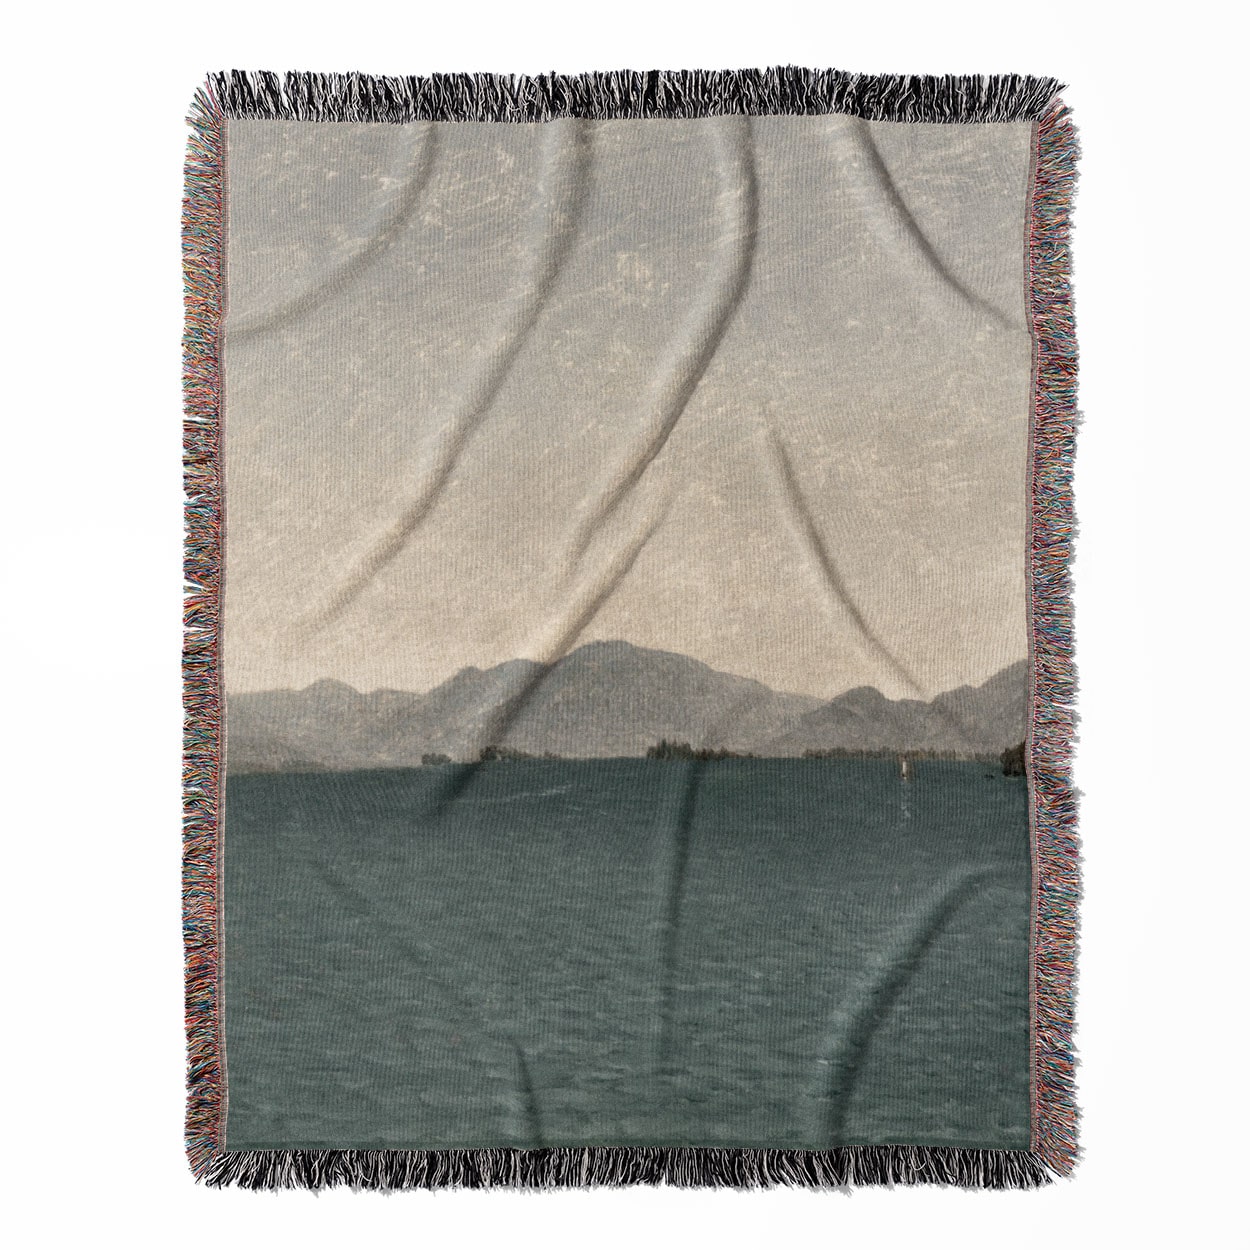 Minimalist Mountains woven throw blanket, made with 100% cotton, featuring a soft and cozy texture with a lake painting for home decor.